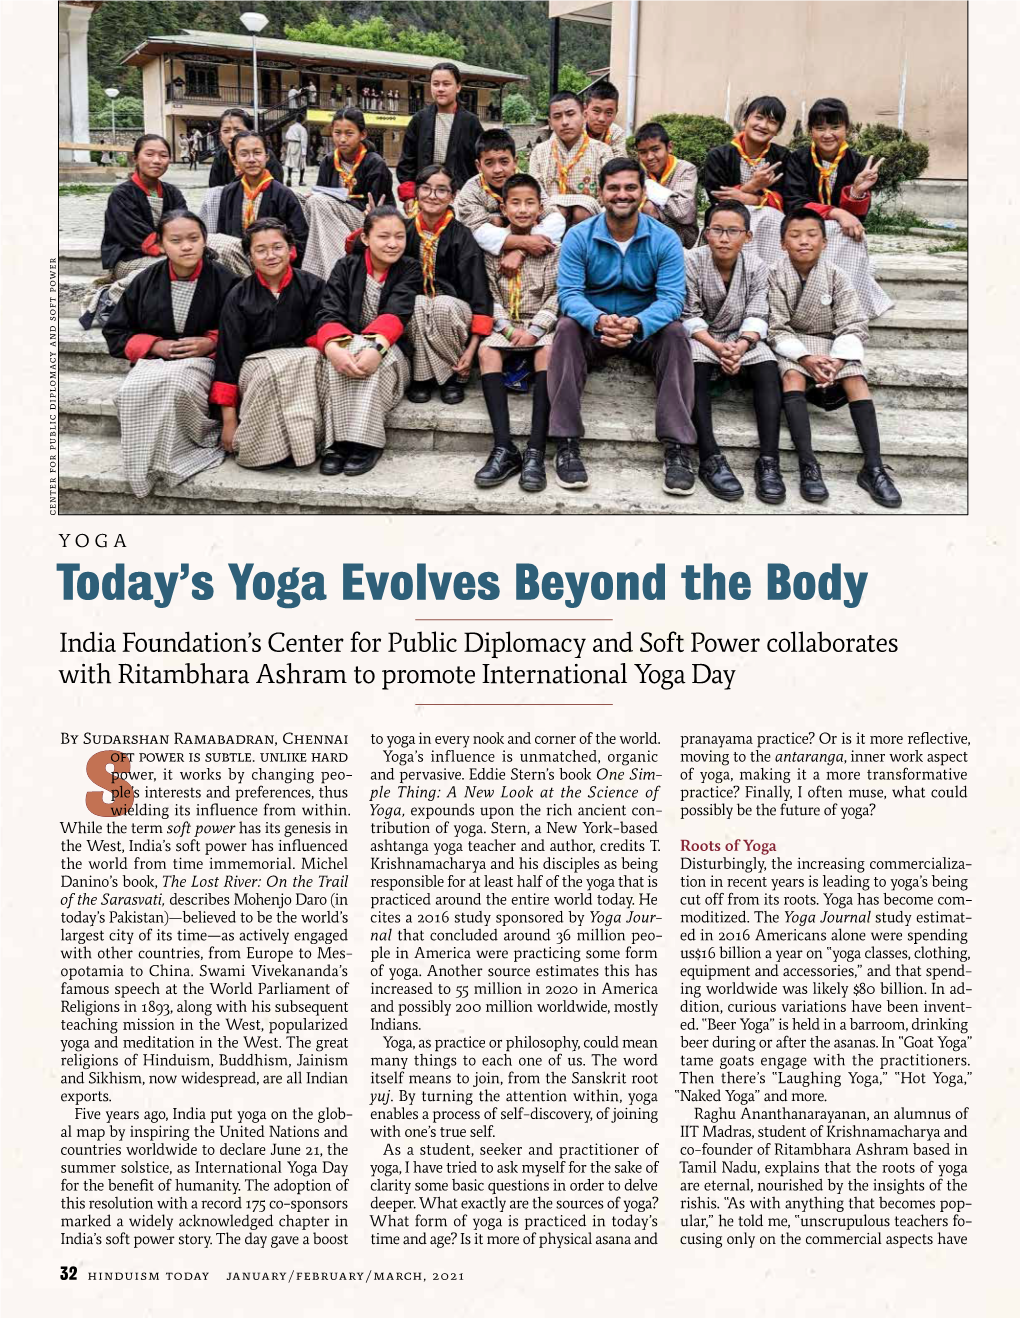 Today's Yoga Evolves Beyond the Body